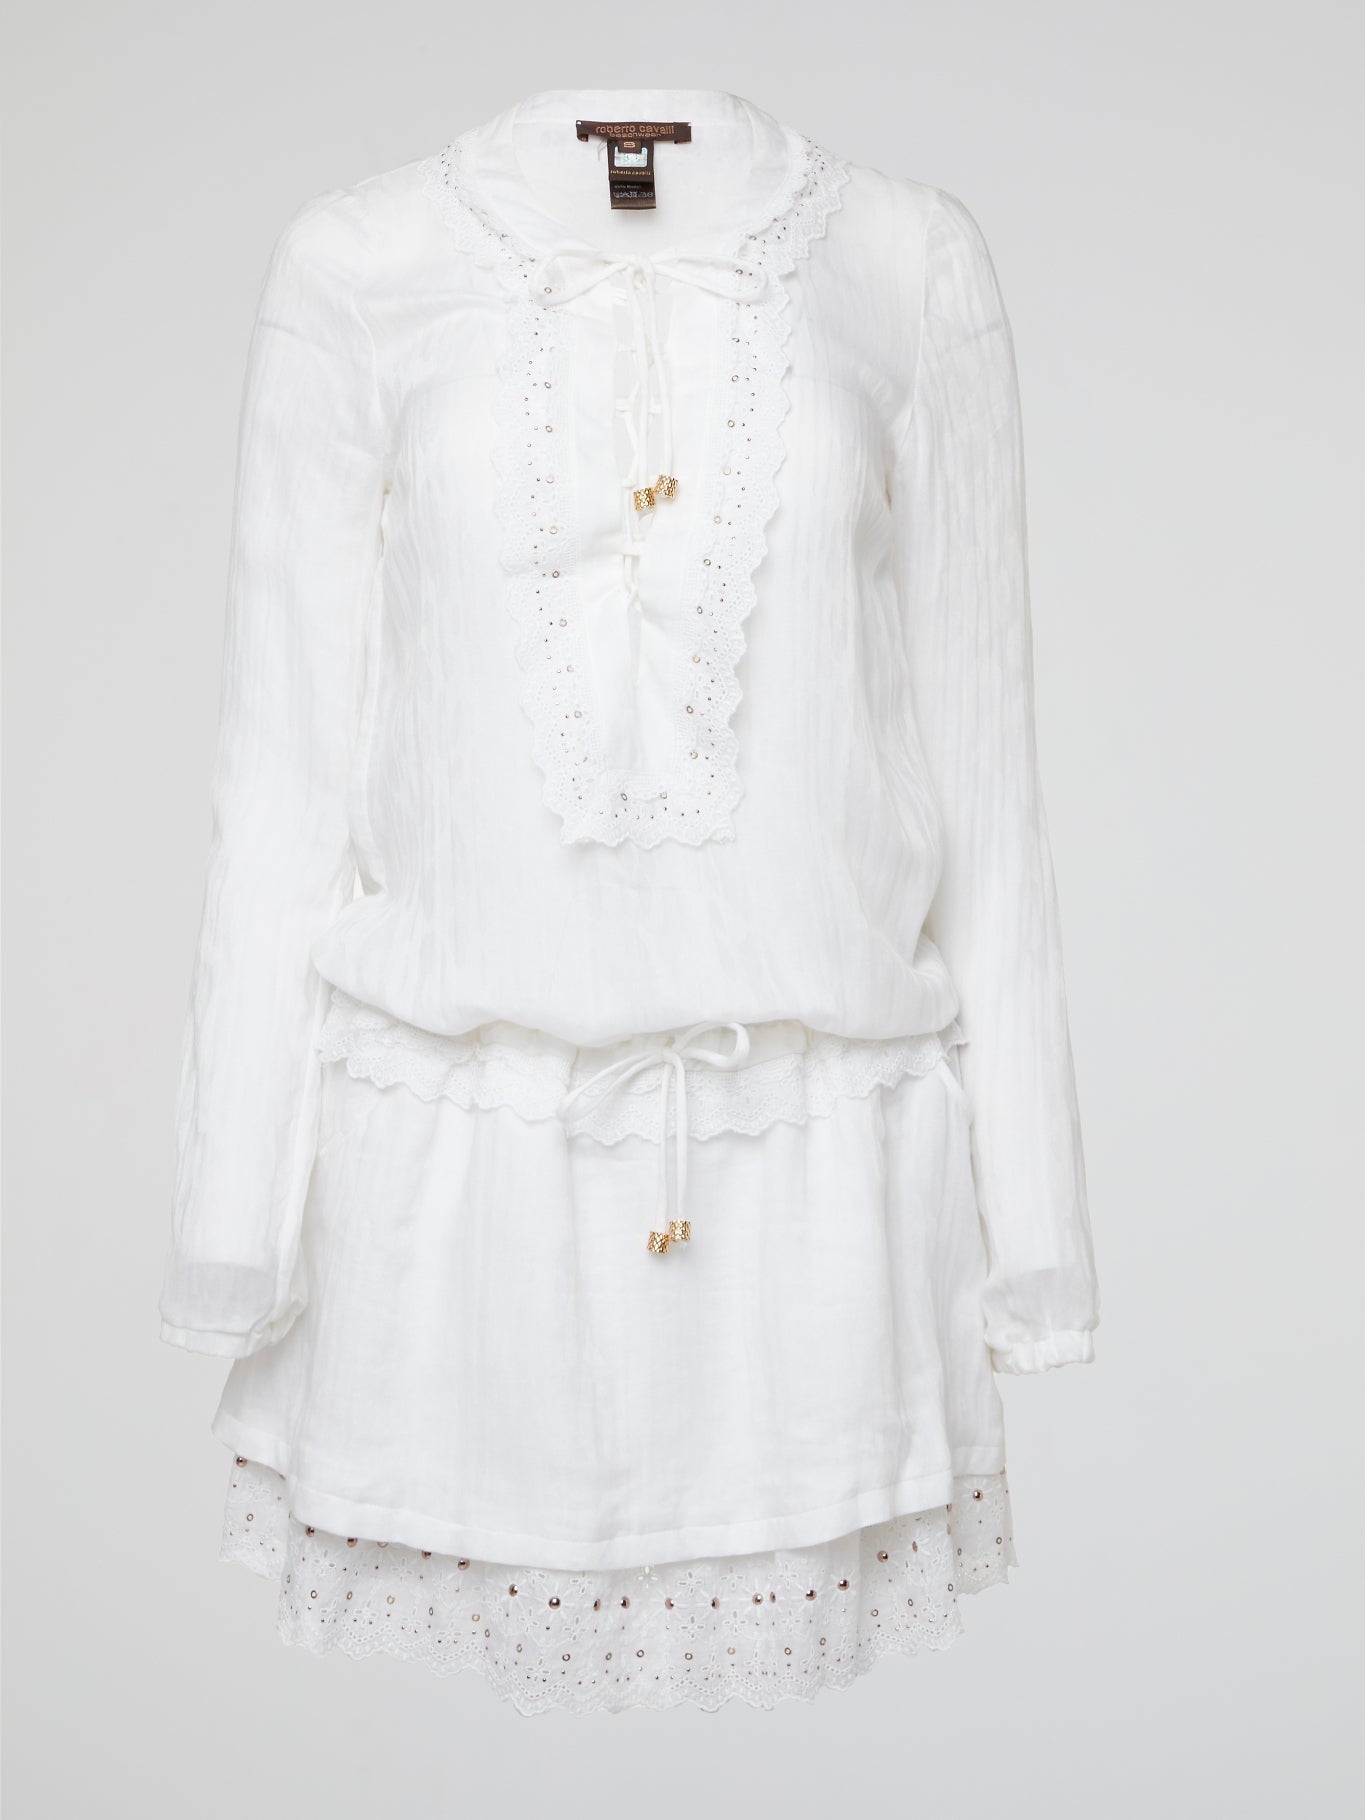 Indulge in the intricate charm of this ethereal white lace up boho dress by Roberto Cavalli, designed to make you feel like a goddess gliding through a field of wildflowers. The delicate lace detailing and flattering silhouette will have you twirling with joy at every summer soiree and beachside sunset. Embrace your inner bohemian spirit and set the trend with this timeless piece that exudes effortless elegance and feminine allure.